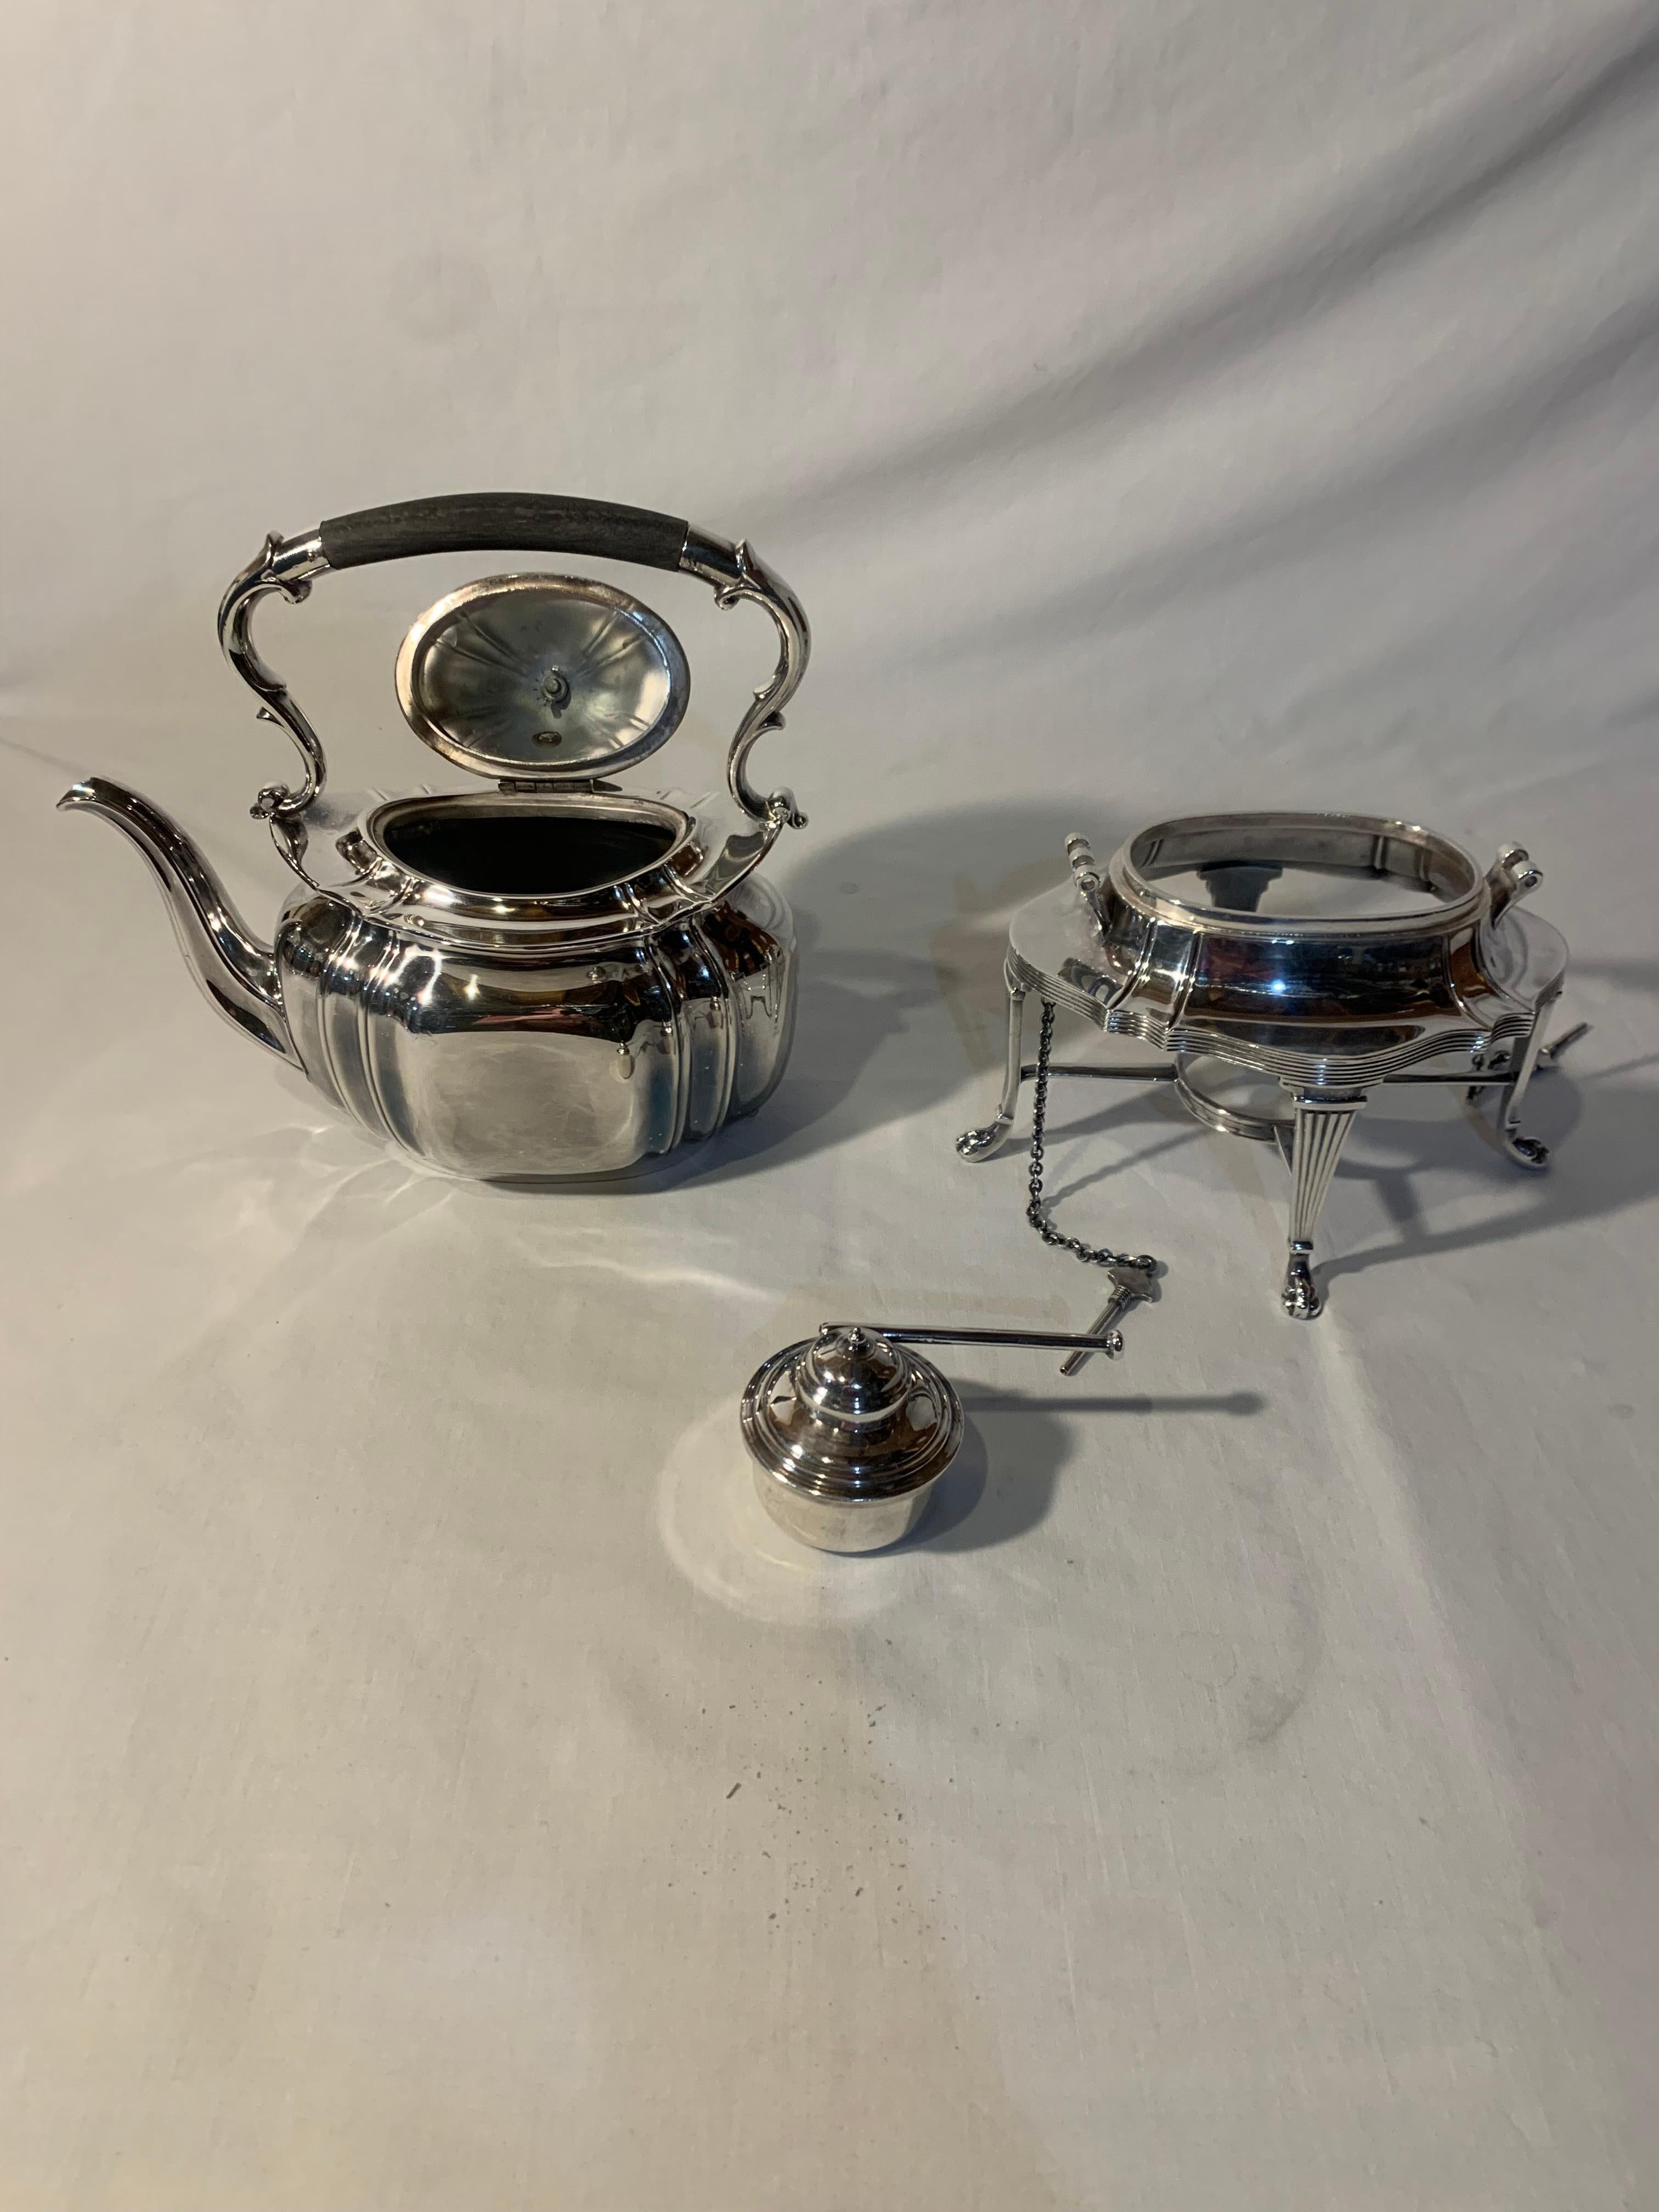 Sheffield silver plate coffee-tea kettle on stand with burner, in the traditional Georgian style Silver Plate. Made in England. Hand Soldered. Insulated handle is genuine ebony. Piece is in excellent condition. there are no visible repairs or dents.